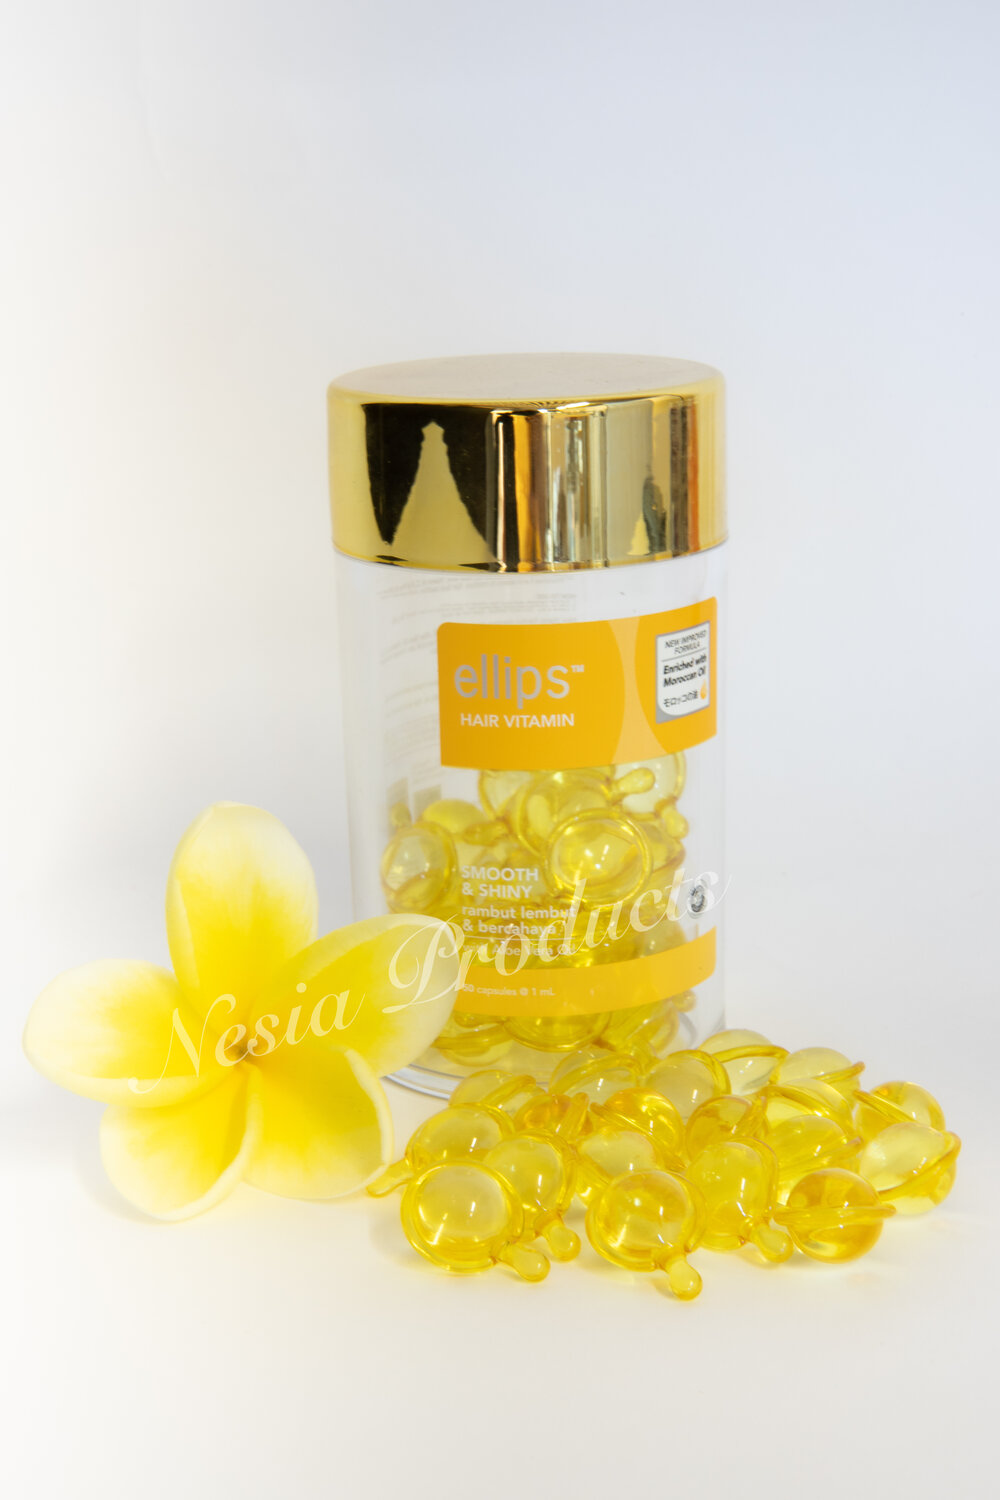 ELLIPS HAIR VITAMIN YELLOW — NesiaProductsQuality imported products from  Incense Darshan, Ellips hair vitamin and batik fashion